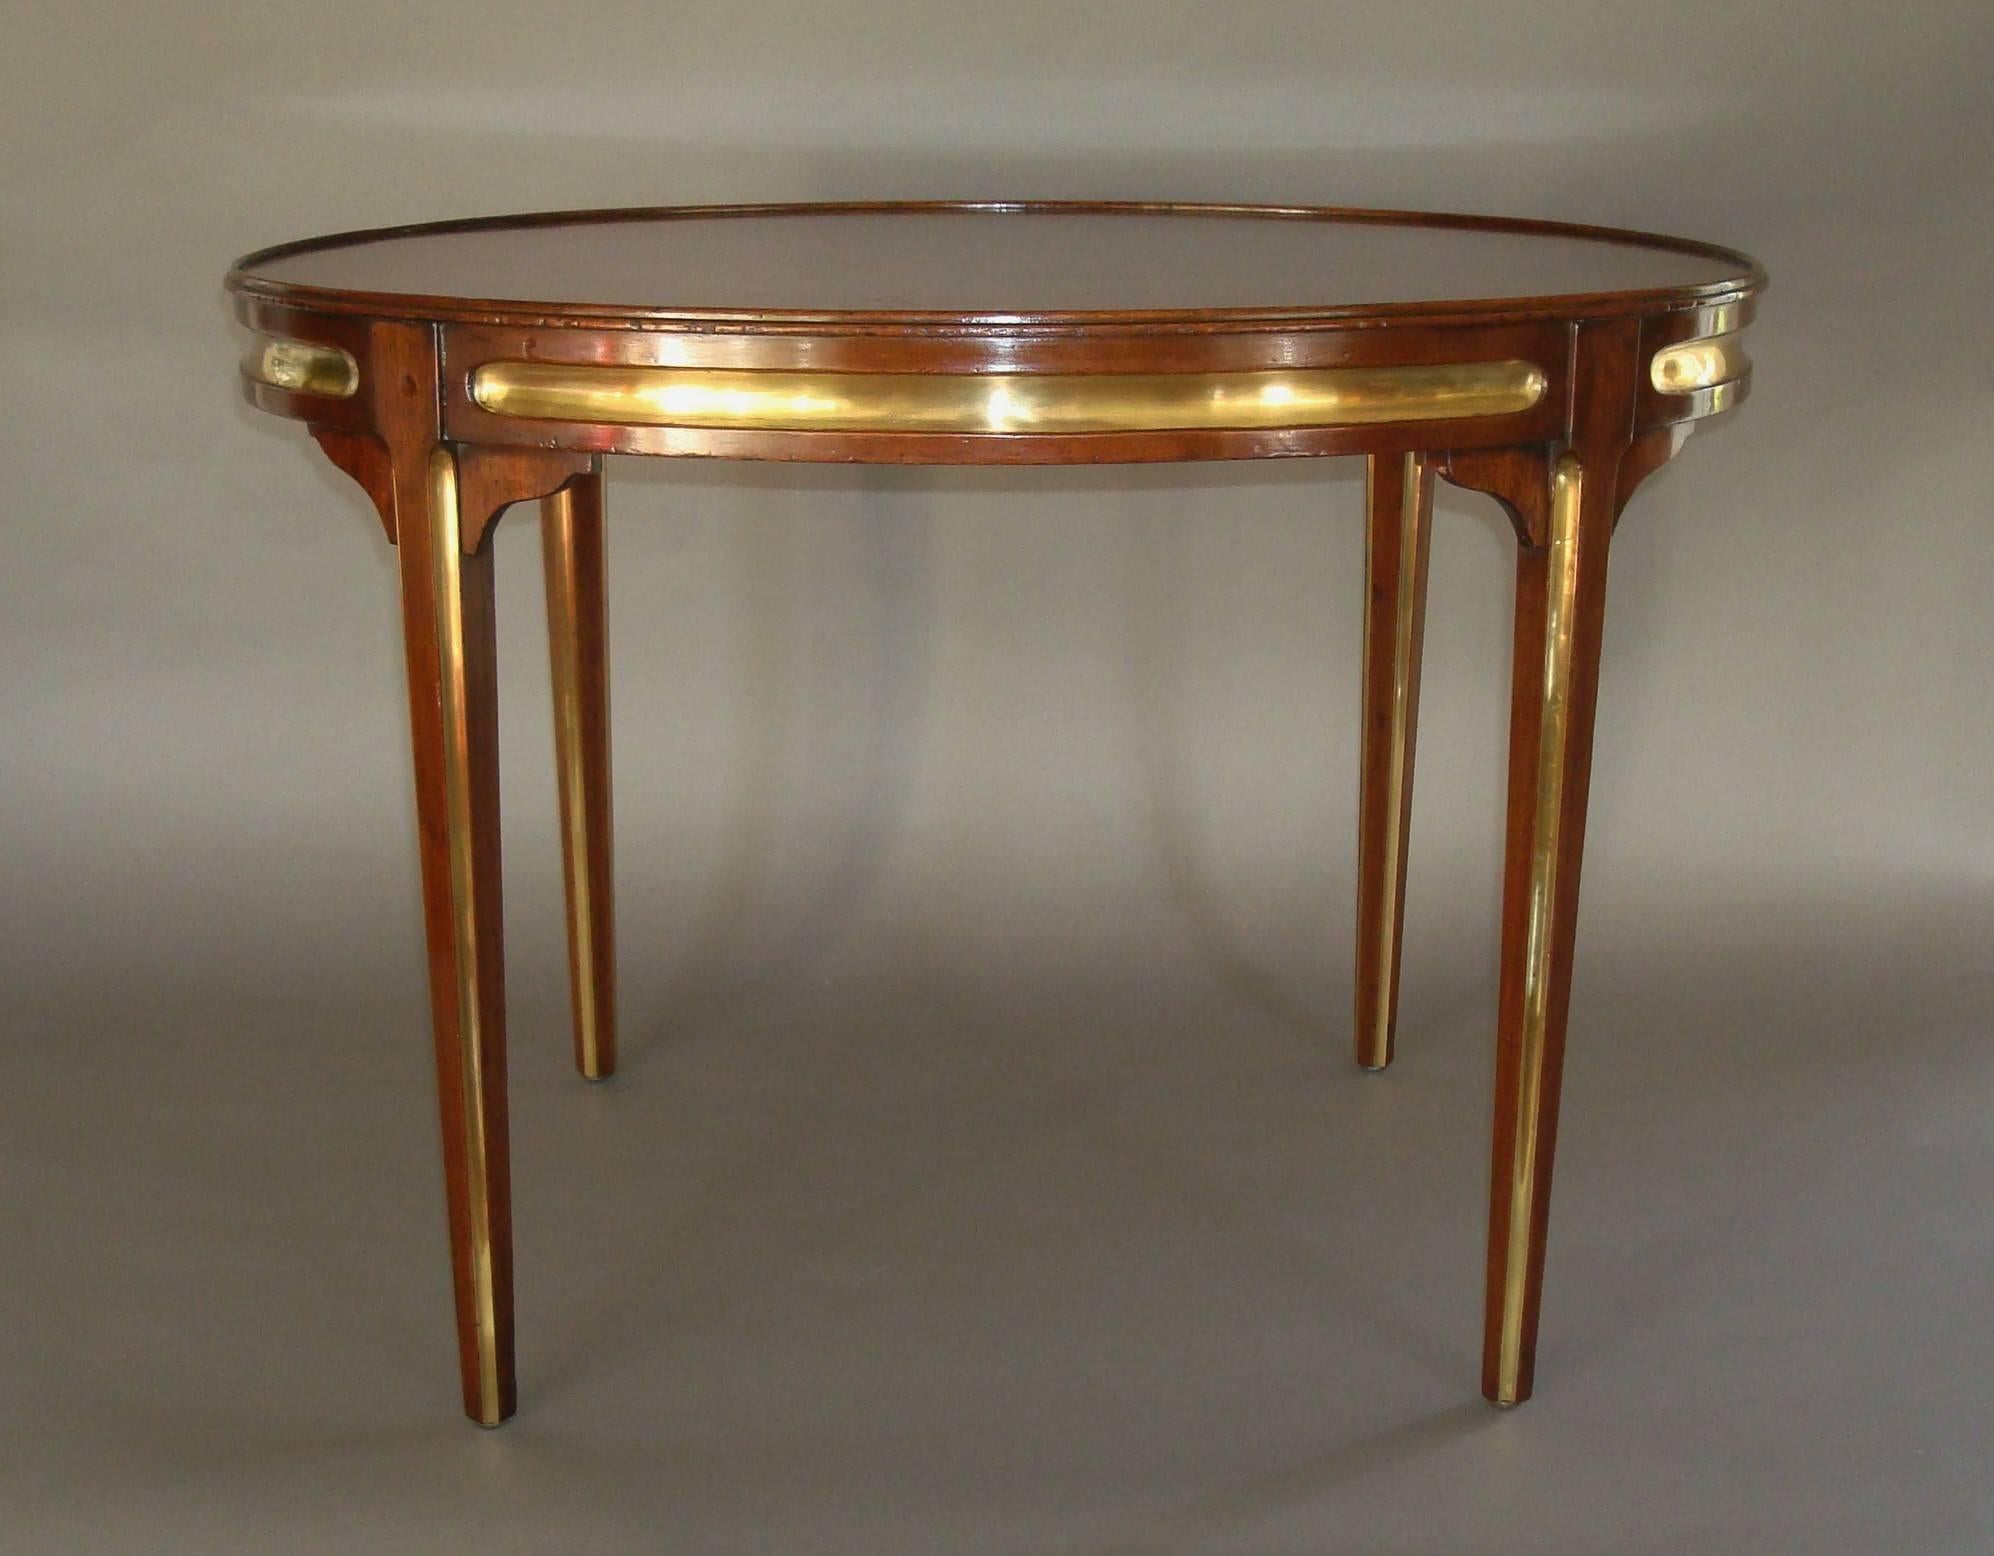 Early 20th century oval mahogany and brass low occasional table, the oval mahogany top with a thin raised moulded edge above a shallow frieze with fluted brass panels around; the square tapering legs headed with scrolled corner brackets and tapering